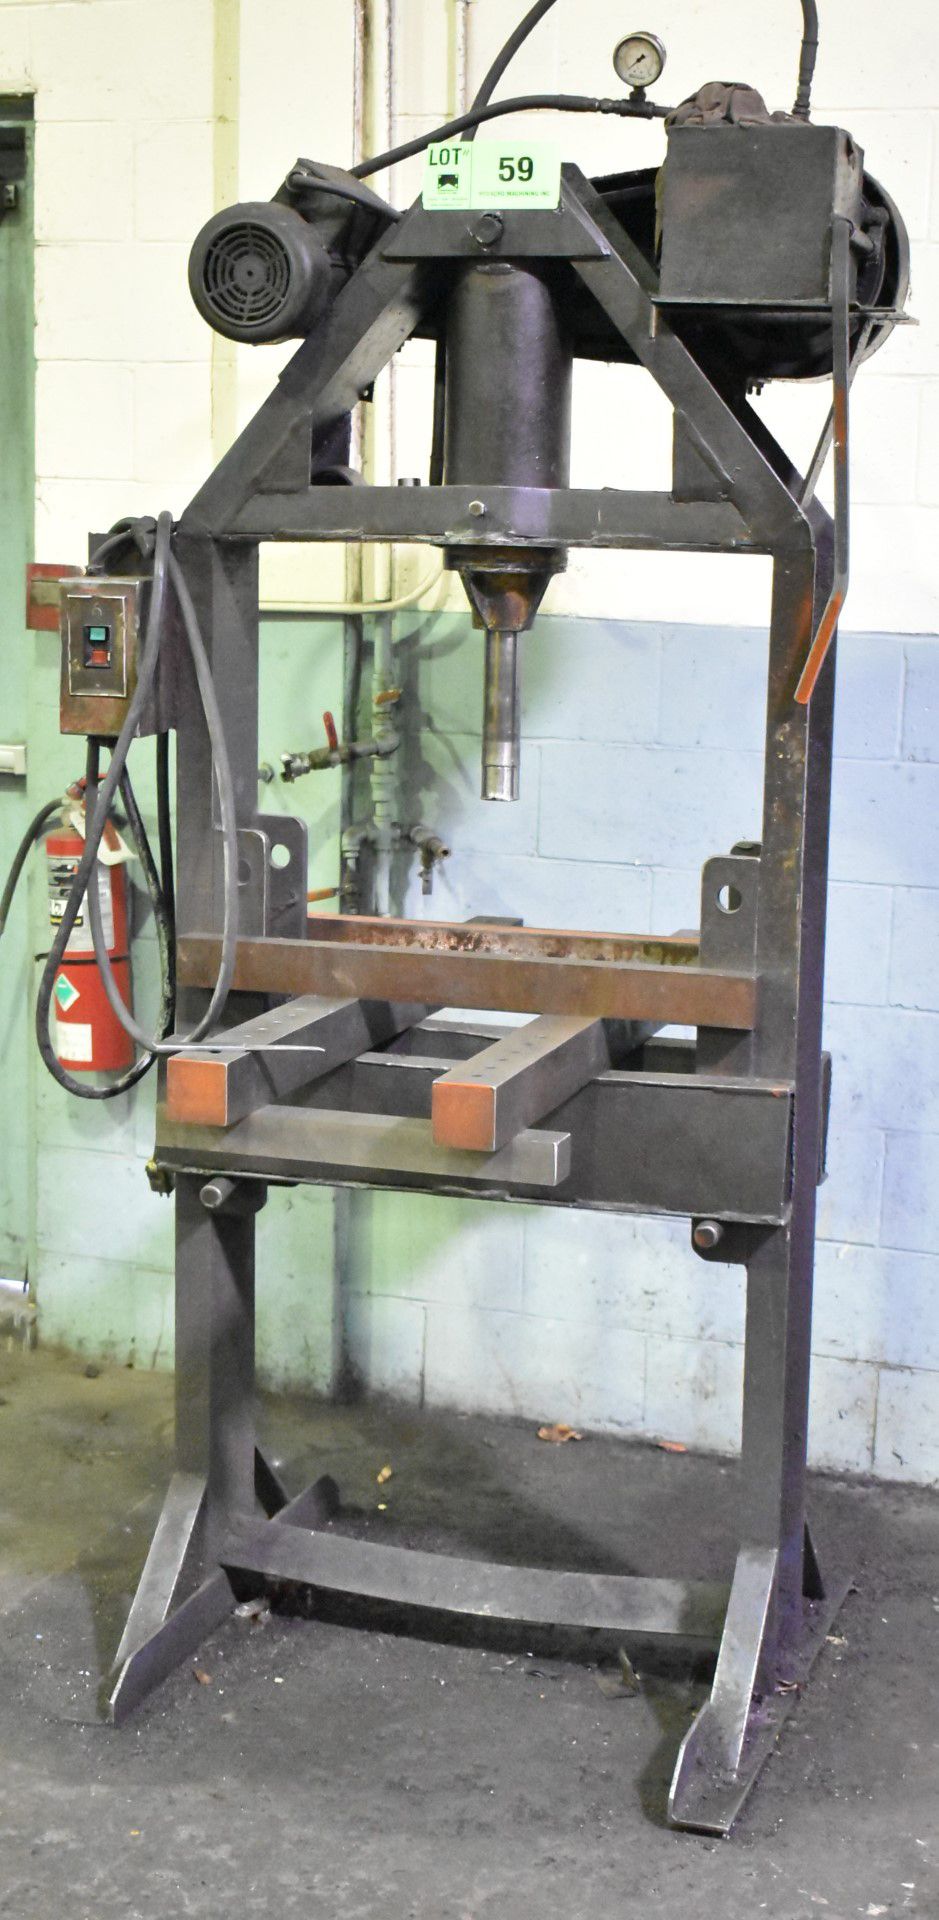 NOVACRO H-FRAME HYDRAULIC SHOP PRESS (CI) [RIGGING FEE FOR LOT#59 - $125 USD PLUS APPLICABLE TAXES]